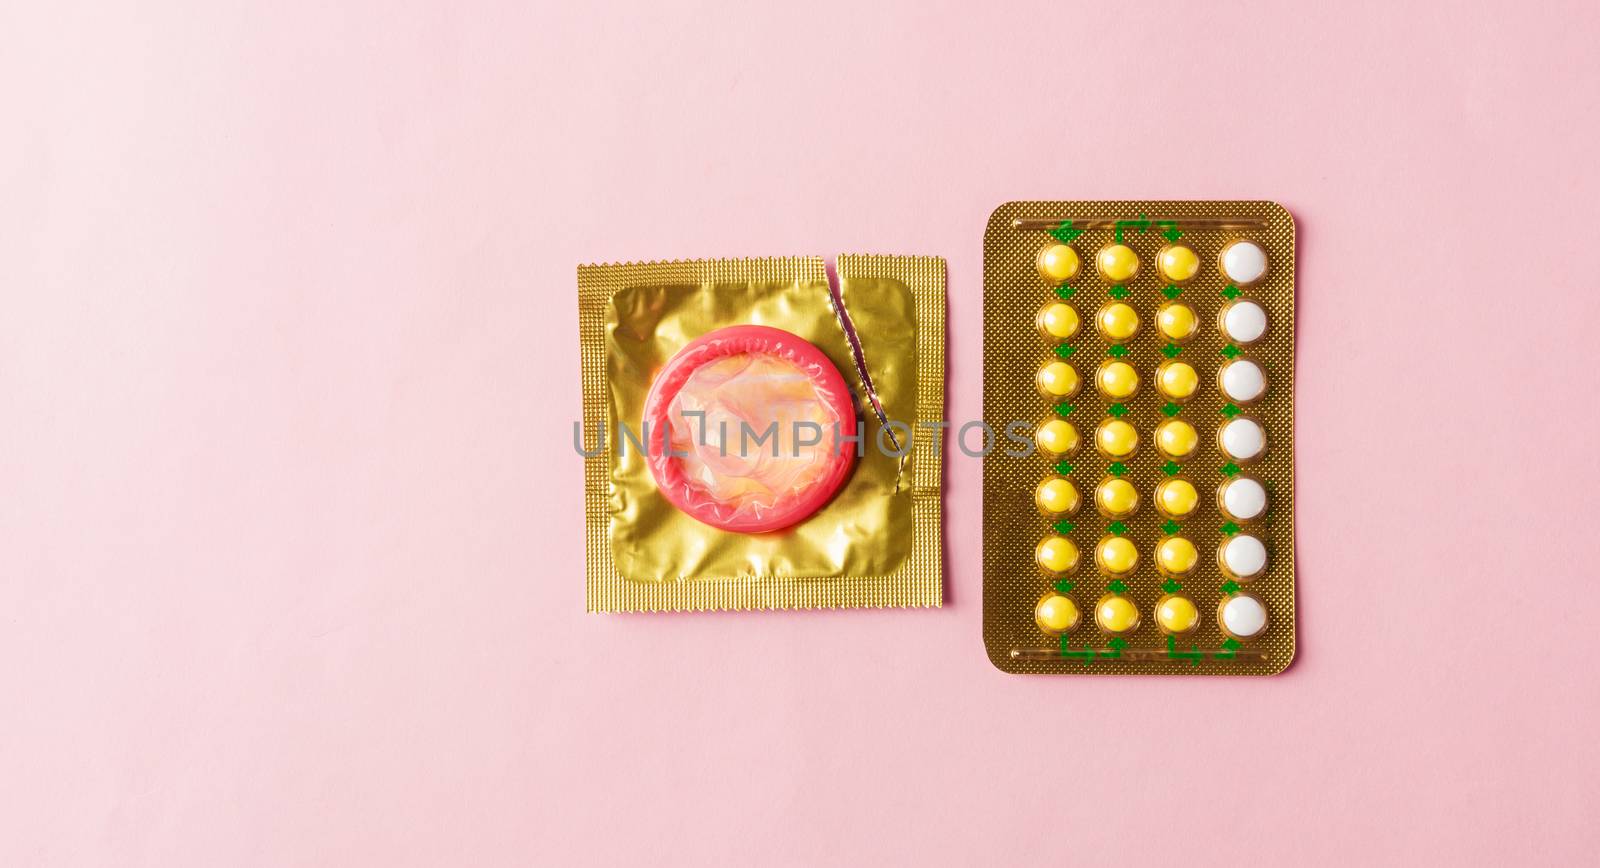 World sexual health or Aids day, condom on wrapper pack and contraceptive pills blister hormonal birth control pills, studio shot isolated on a pink background, Safe sex and reproductive health concept